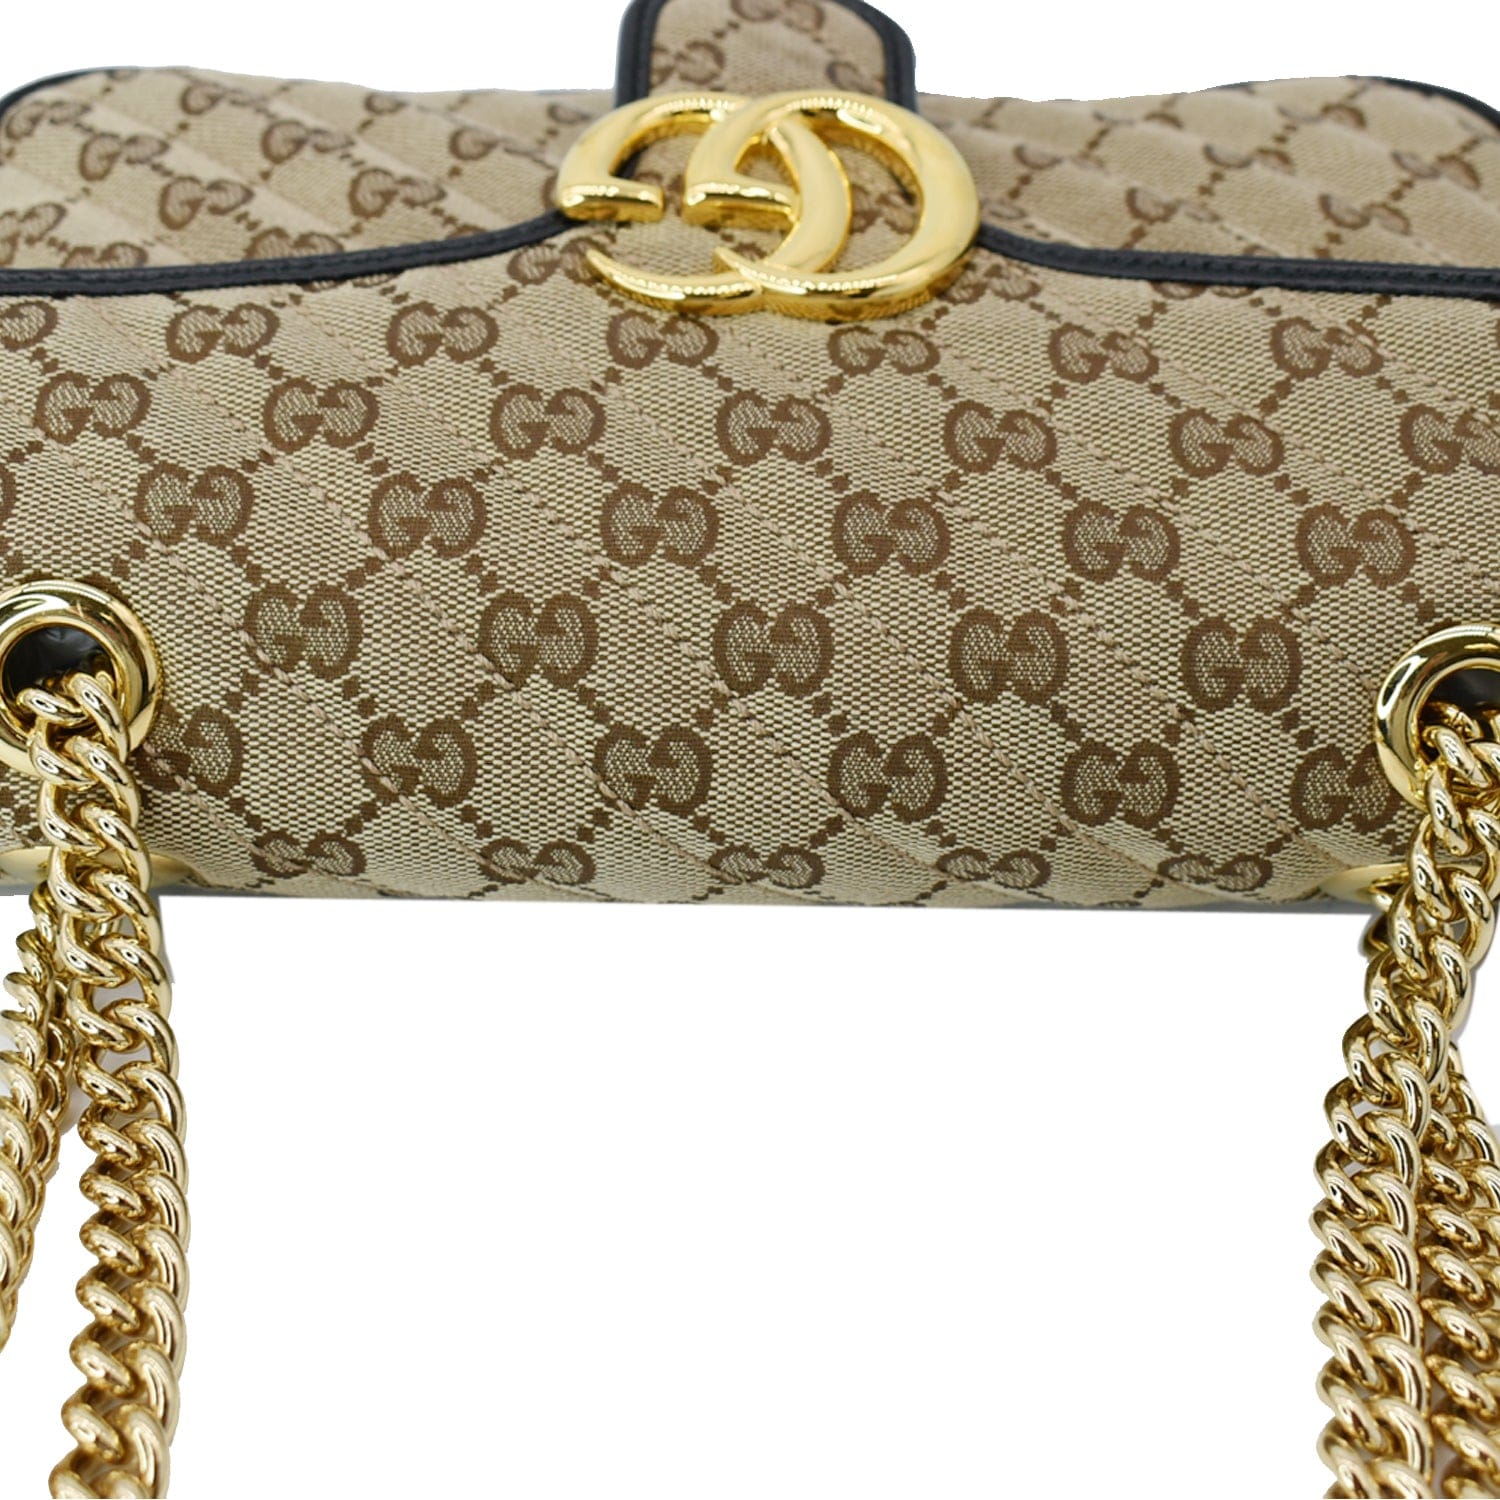 WMNS) GUCCI GG Marmont Small-Sized Single-Shoulder Bag Blue 443497